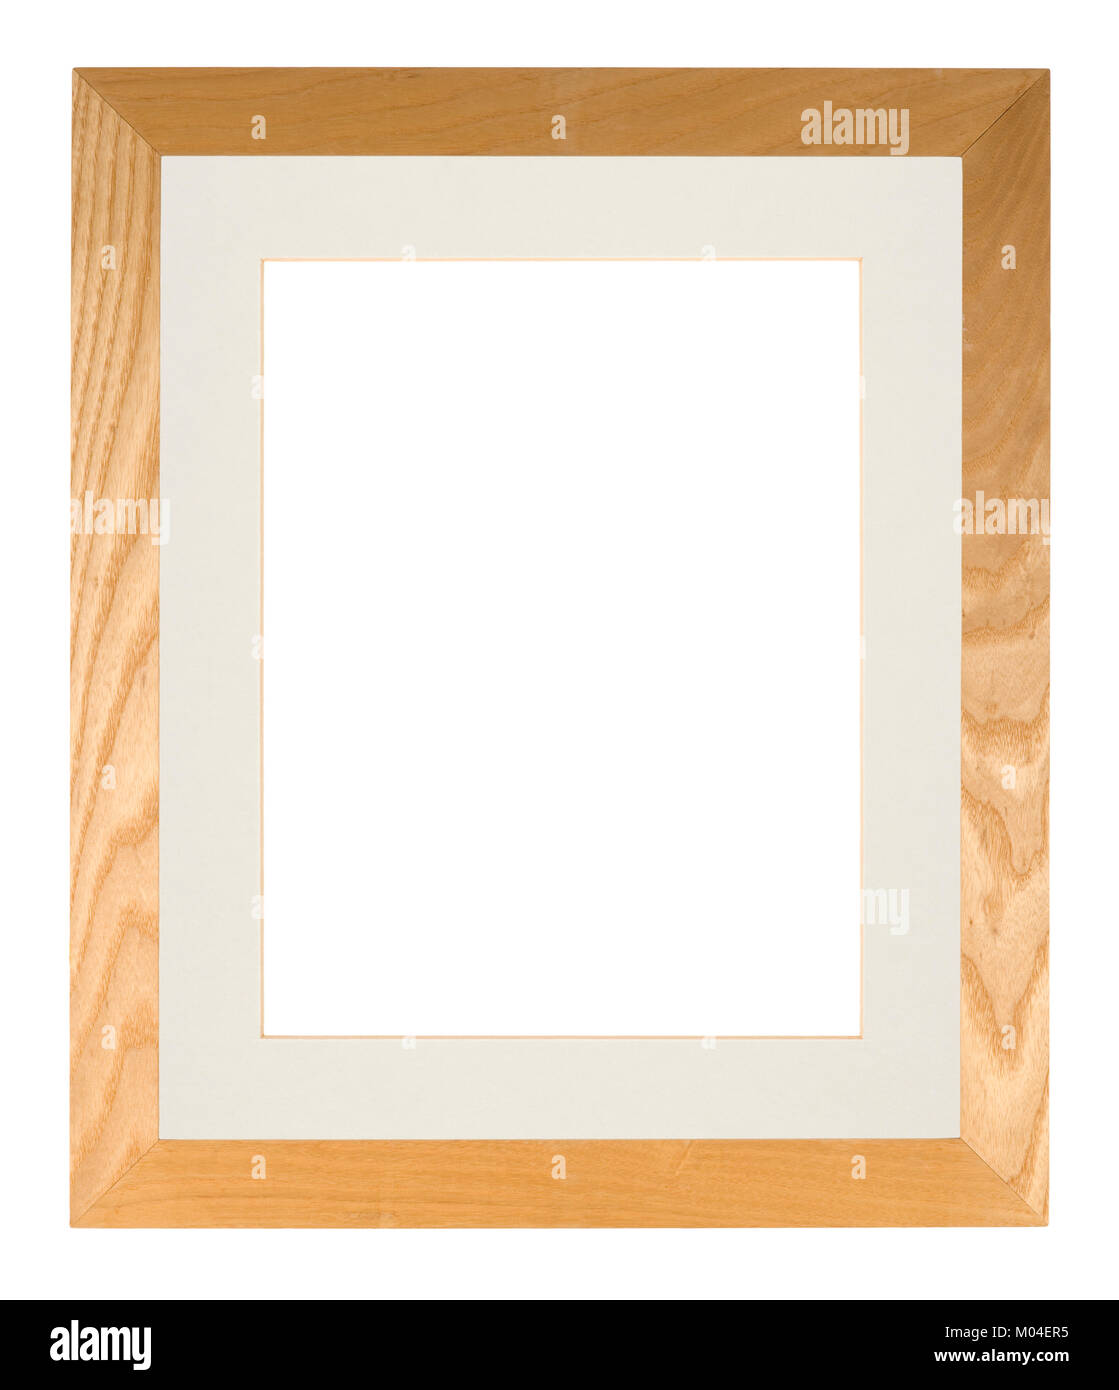 Empty picture frame, light oak wood with mount Stock Photo